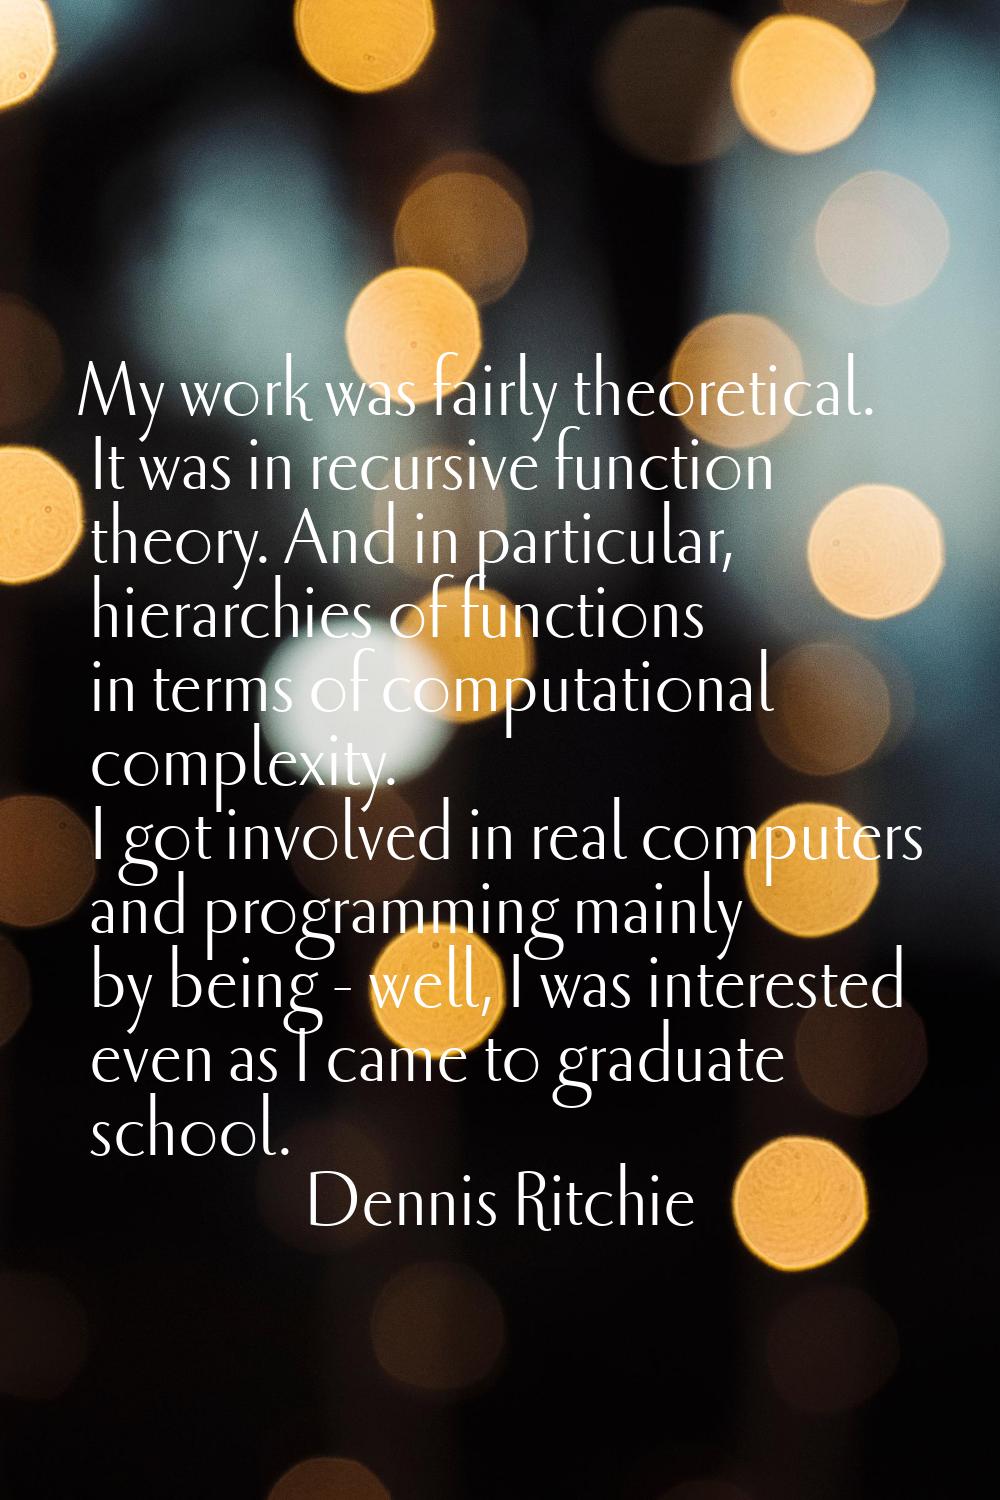 My work was fairly theoretical. It was in recursive function theory. And in particular, hierarchies